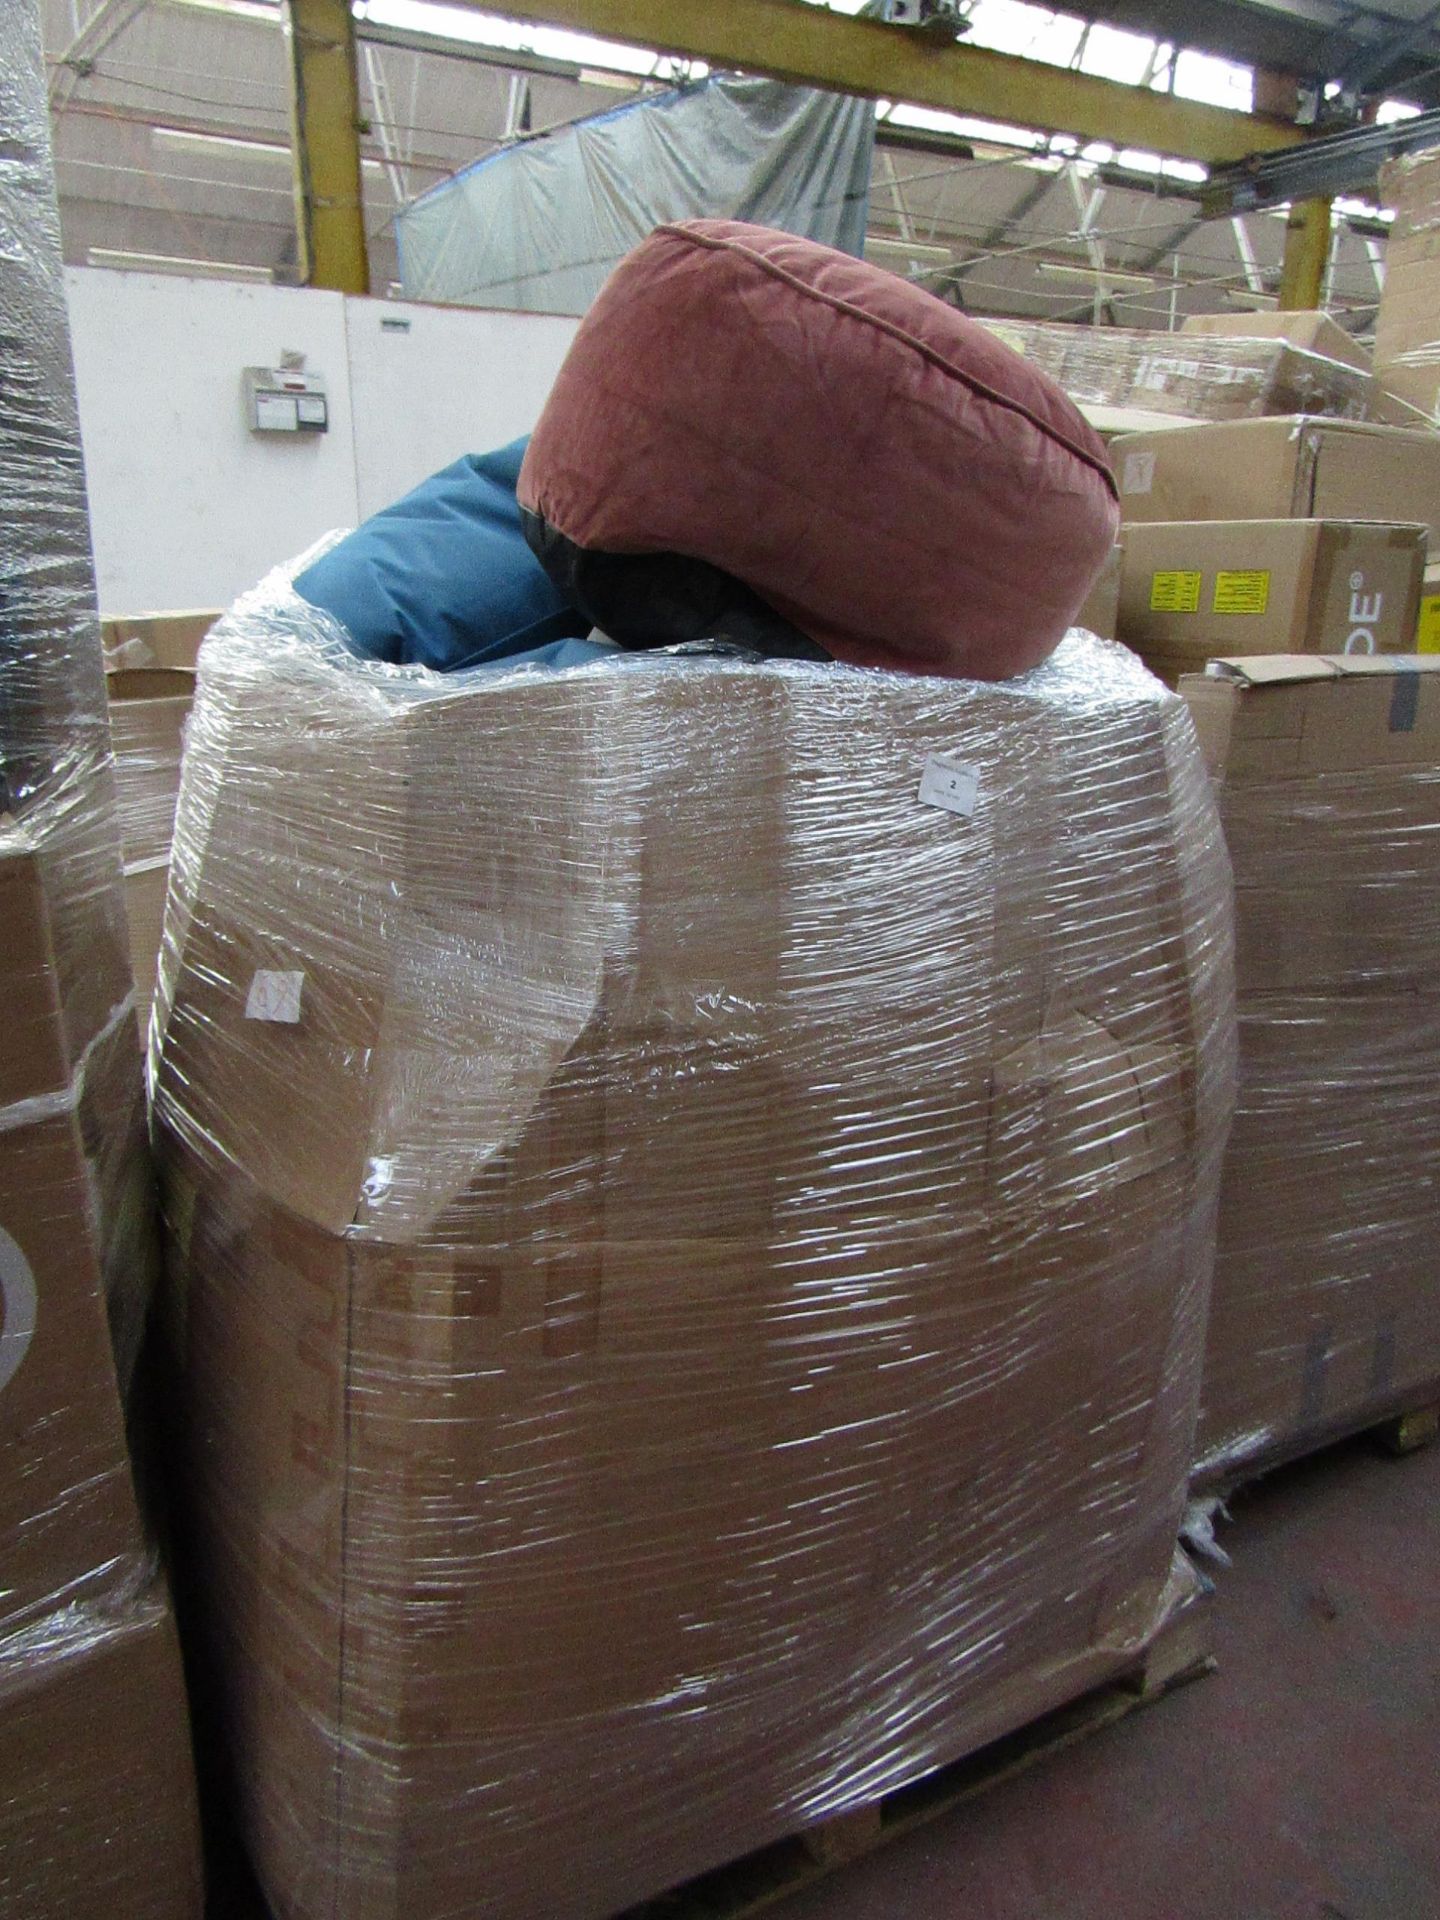 | 1x | PALLET OF MADE.COM SOFT FURNISHING WHICH APPEARS TO INCLUDE BEAN BAGS, FOOT STOOLS AND